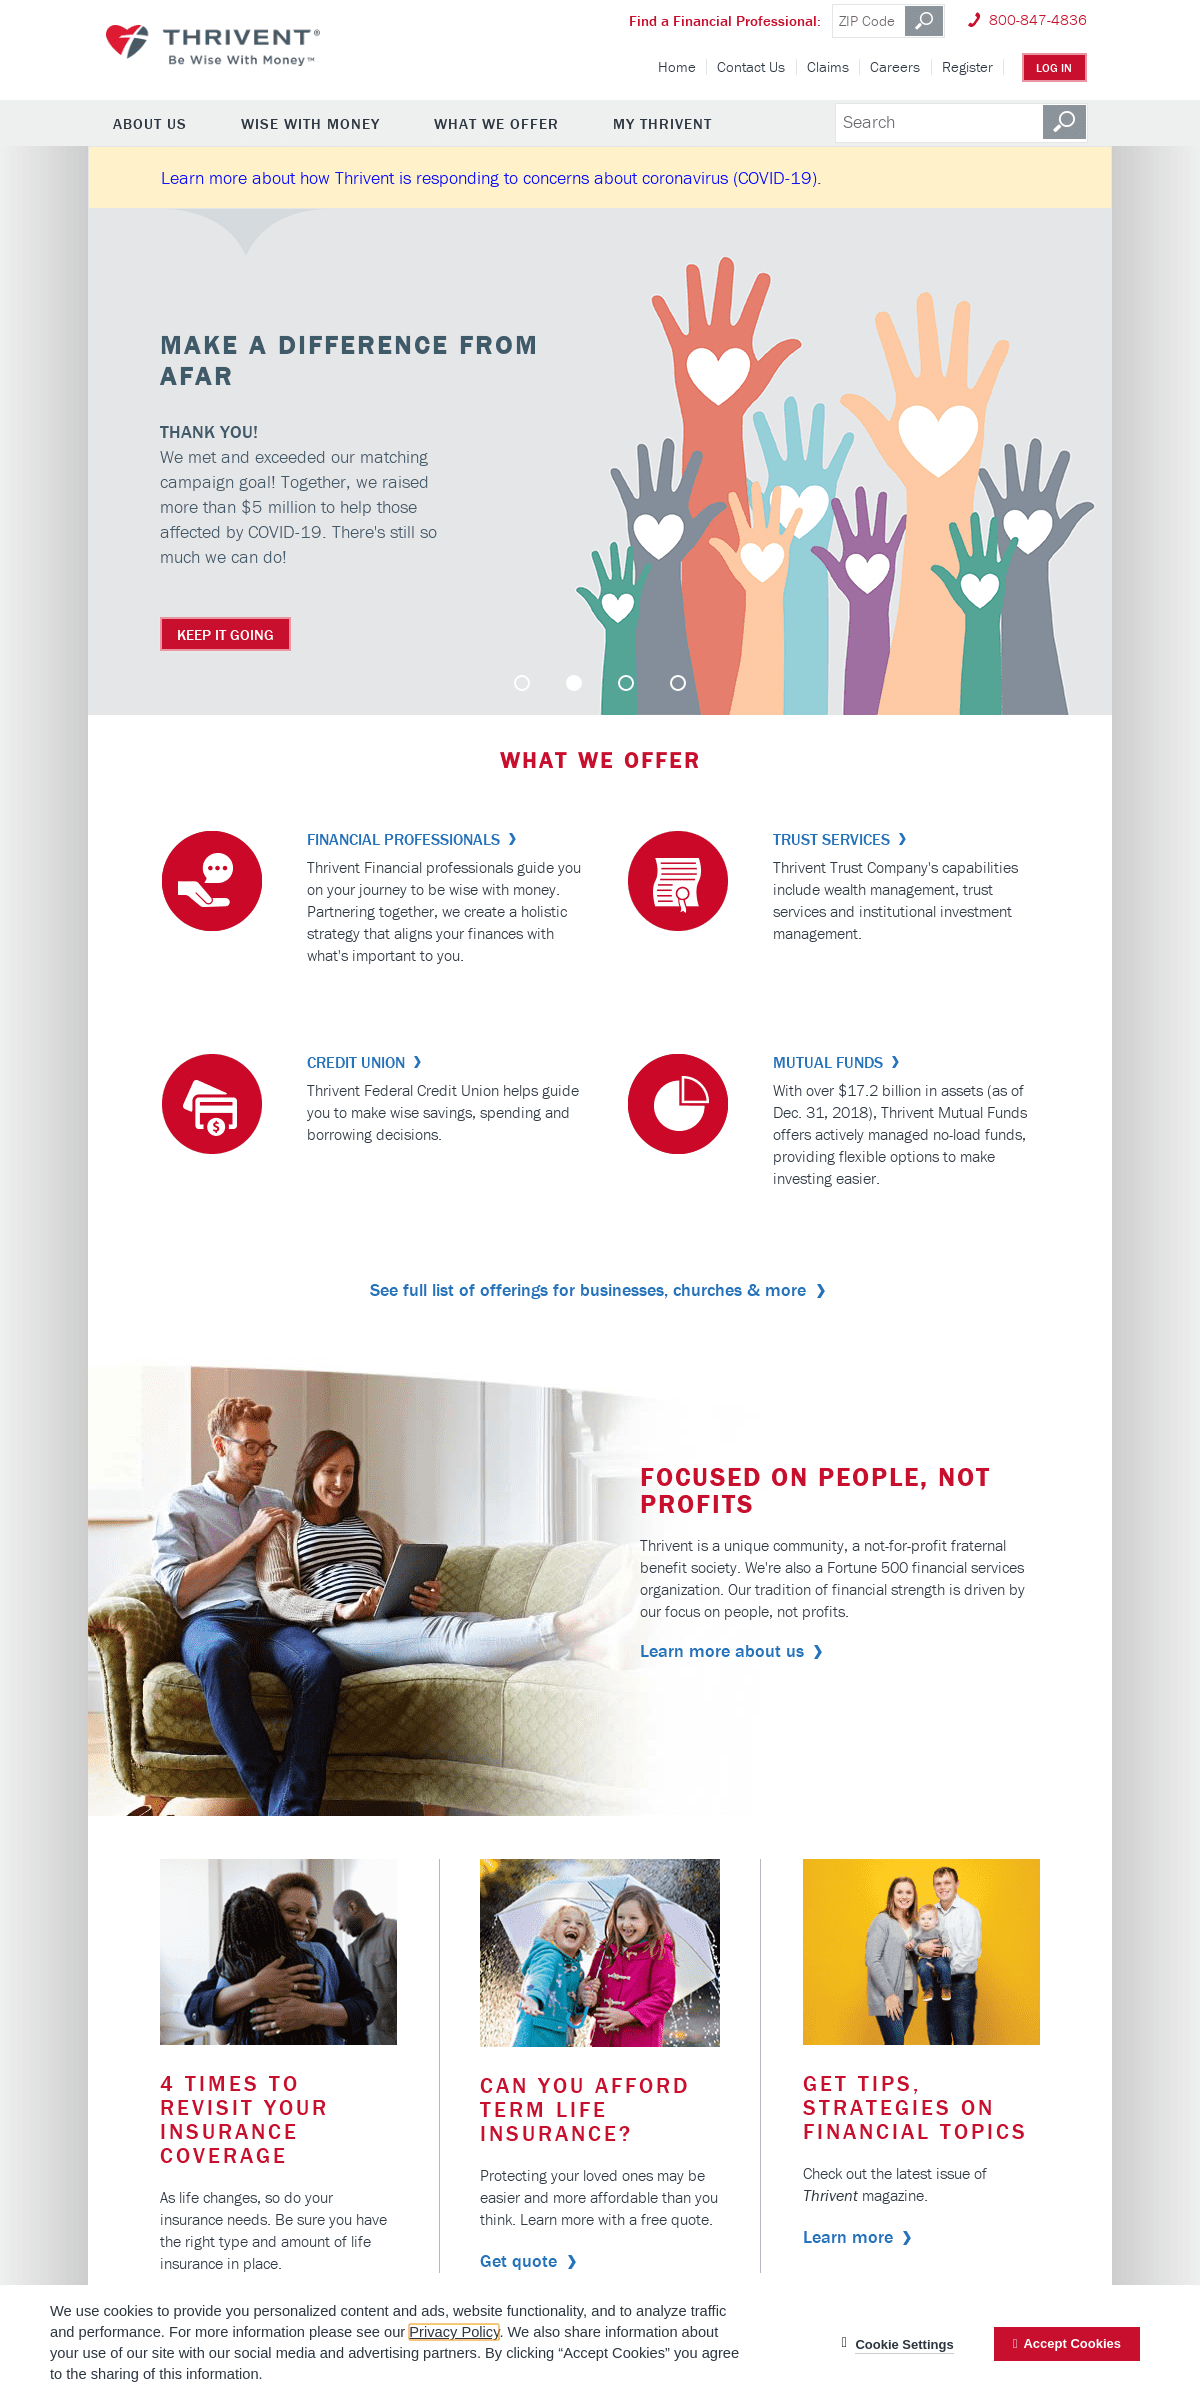 A complete backup of thrivent.com